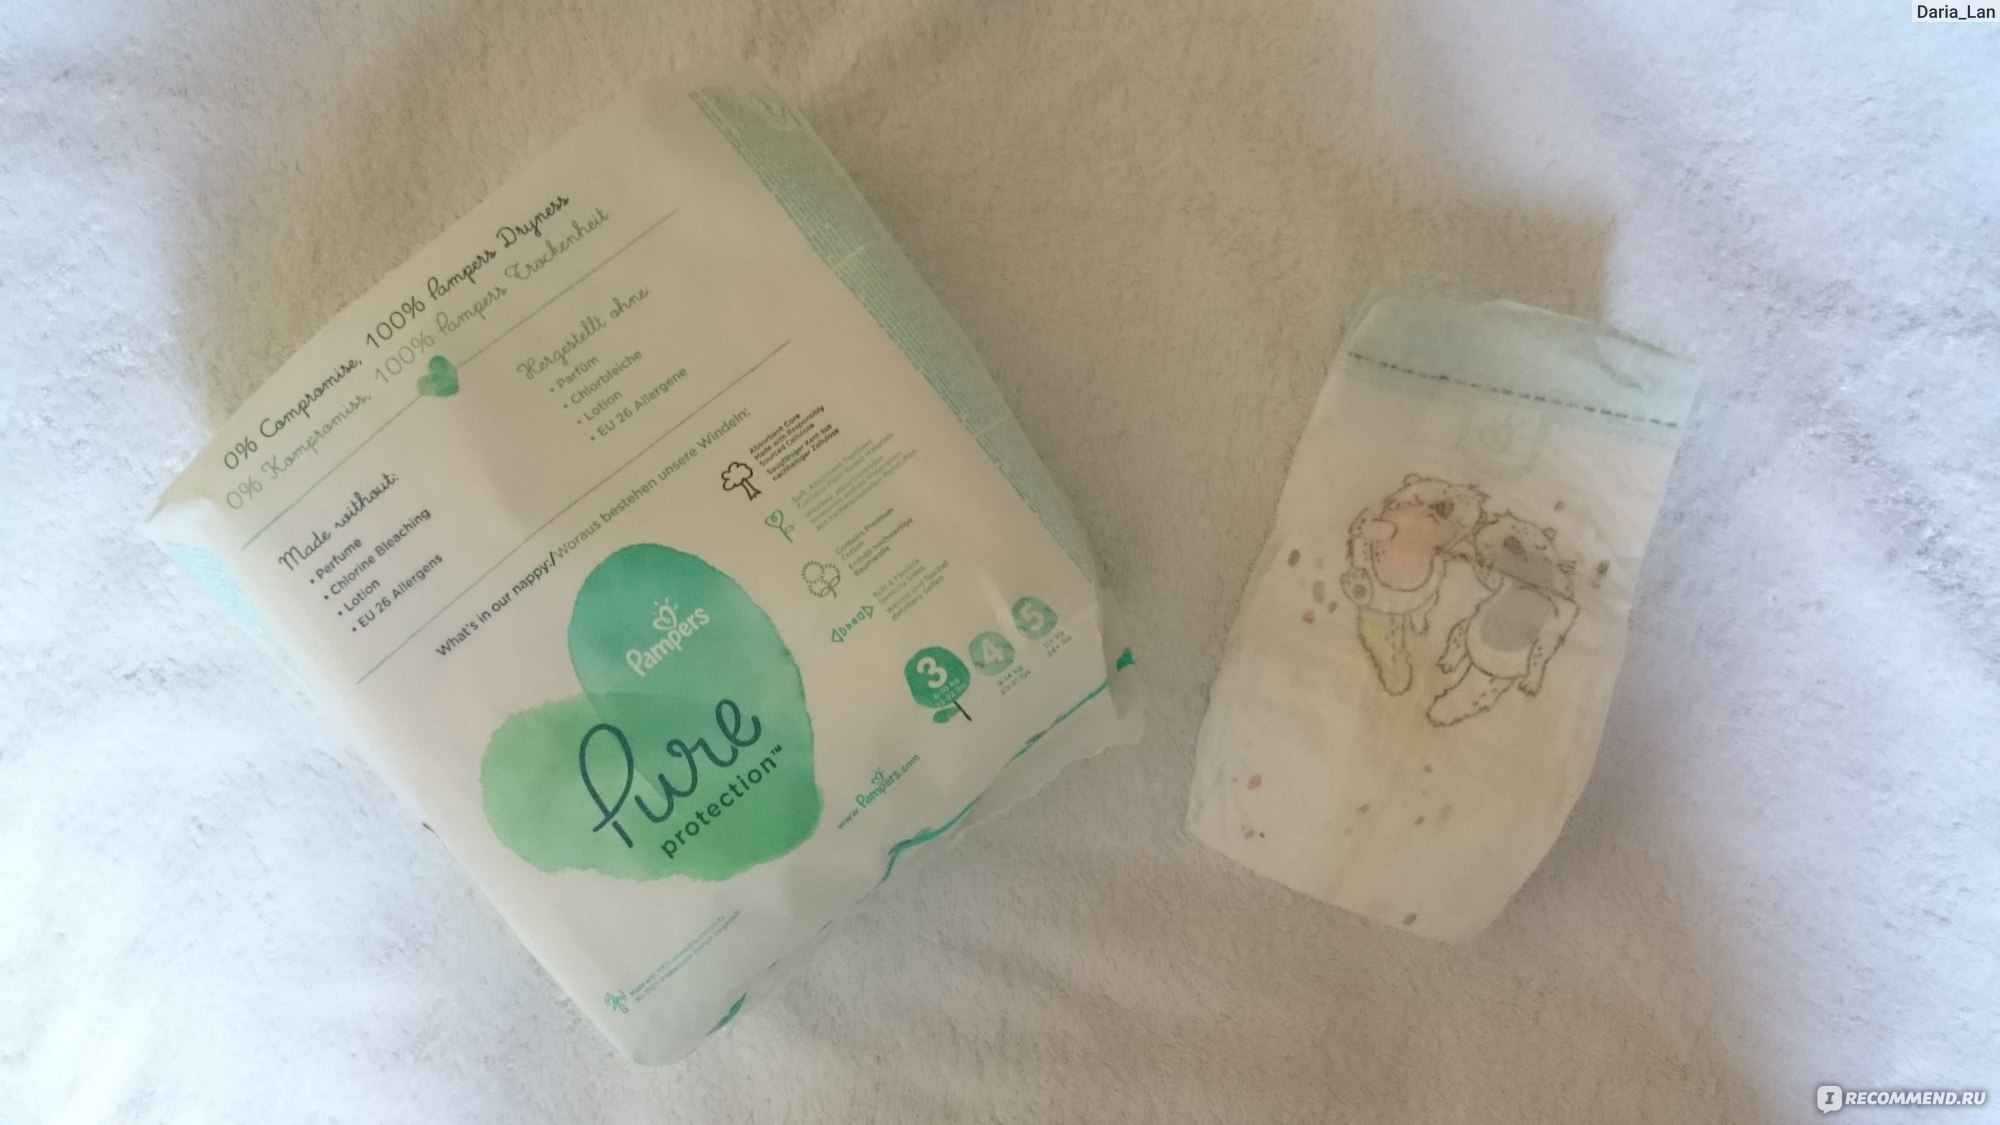 pampers pure protection ingredients